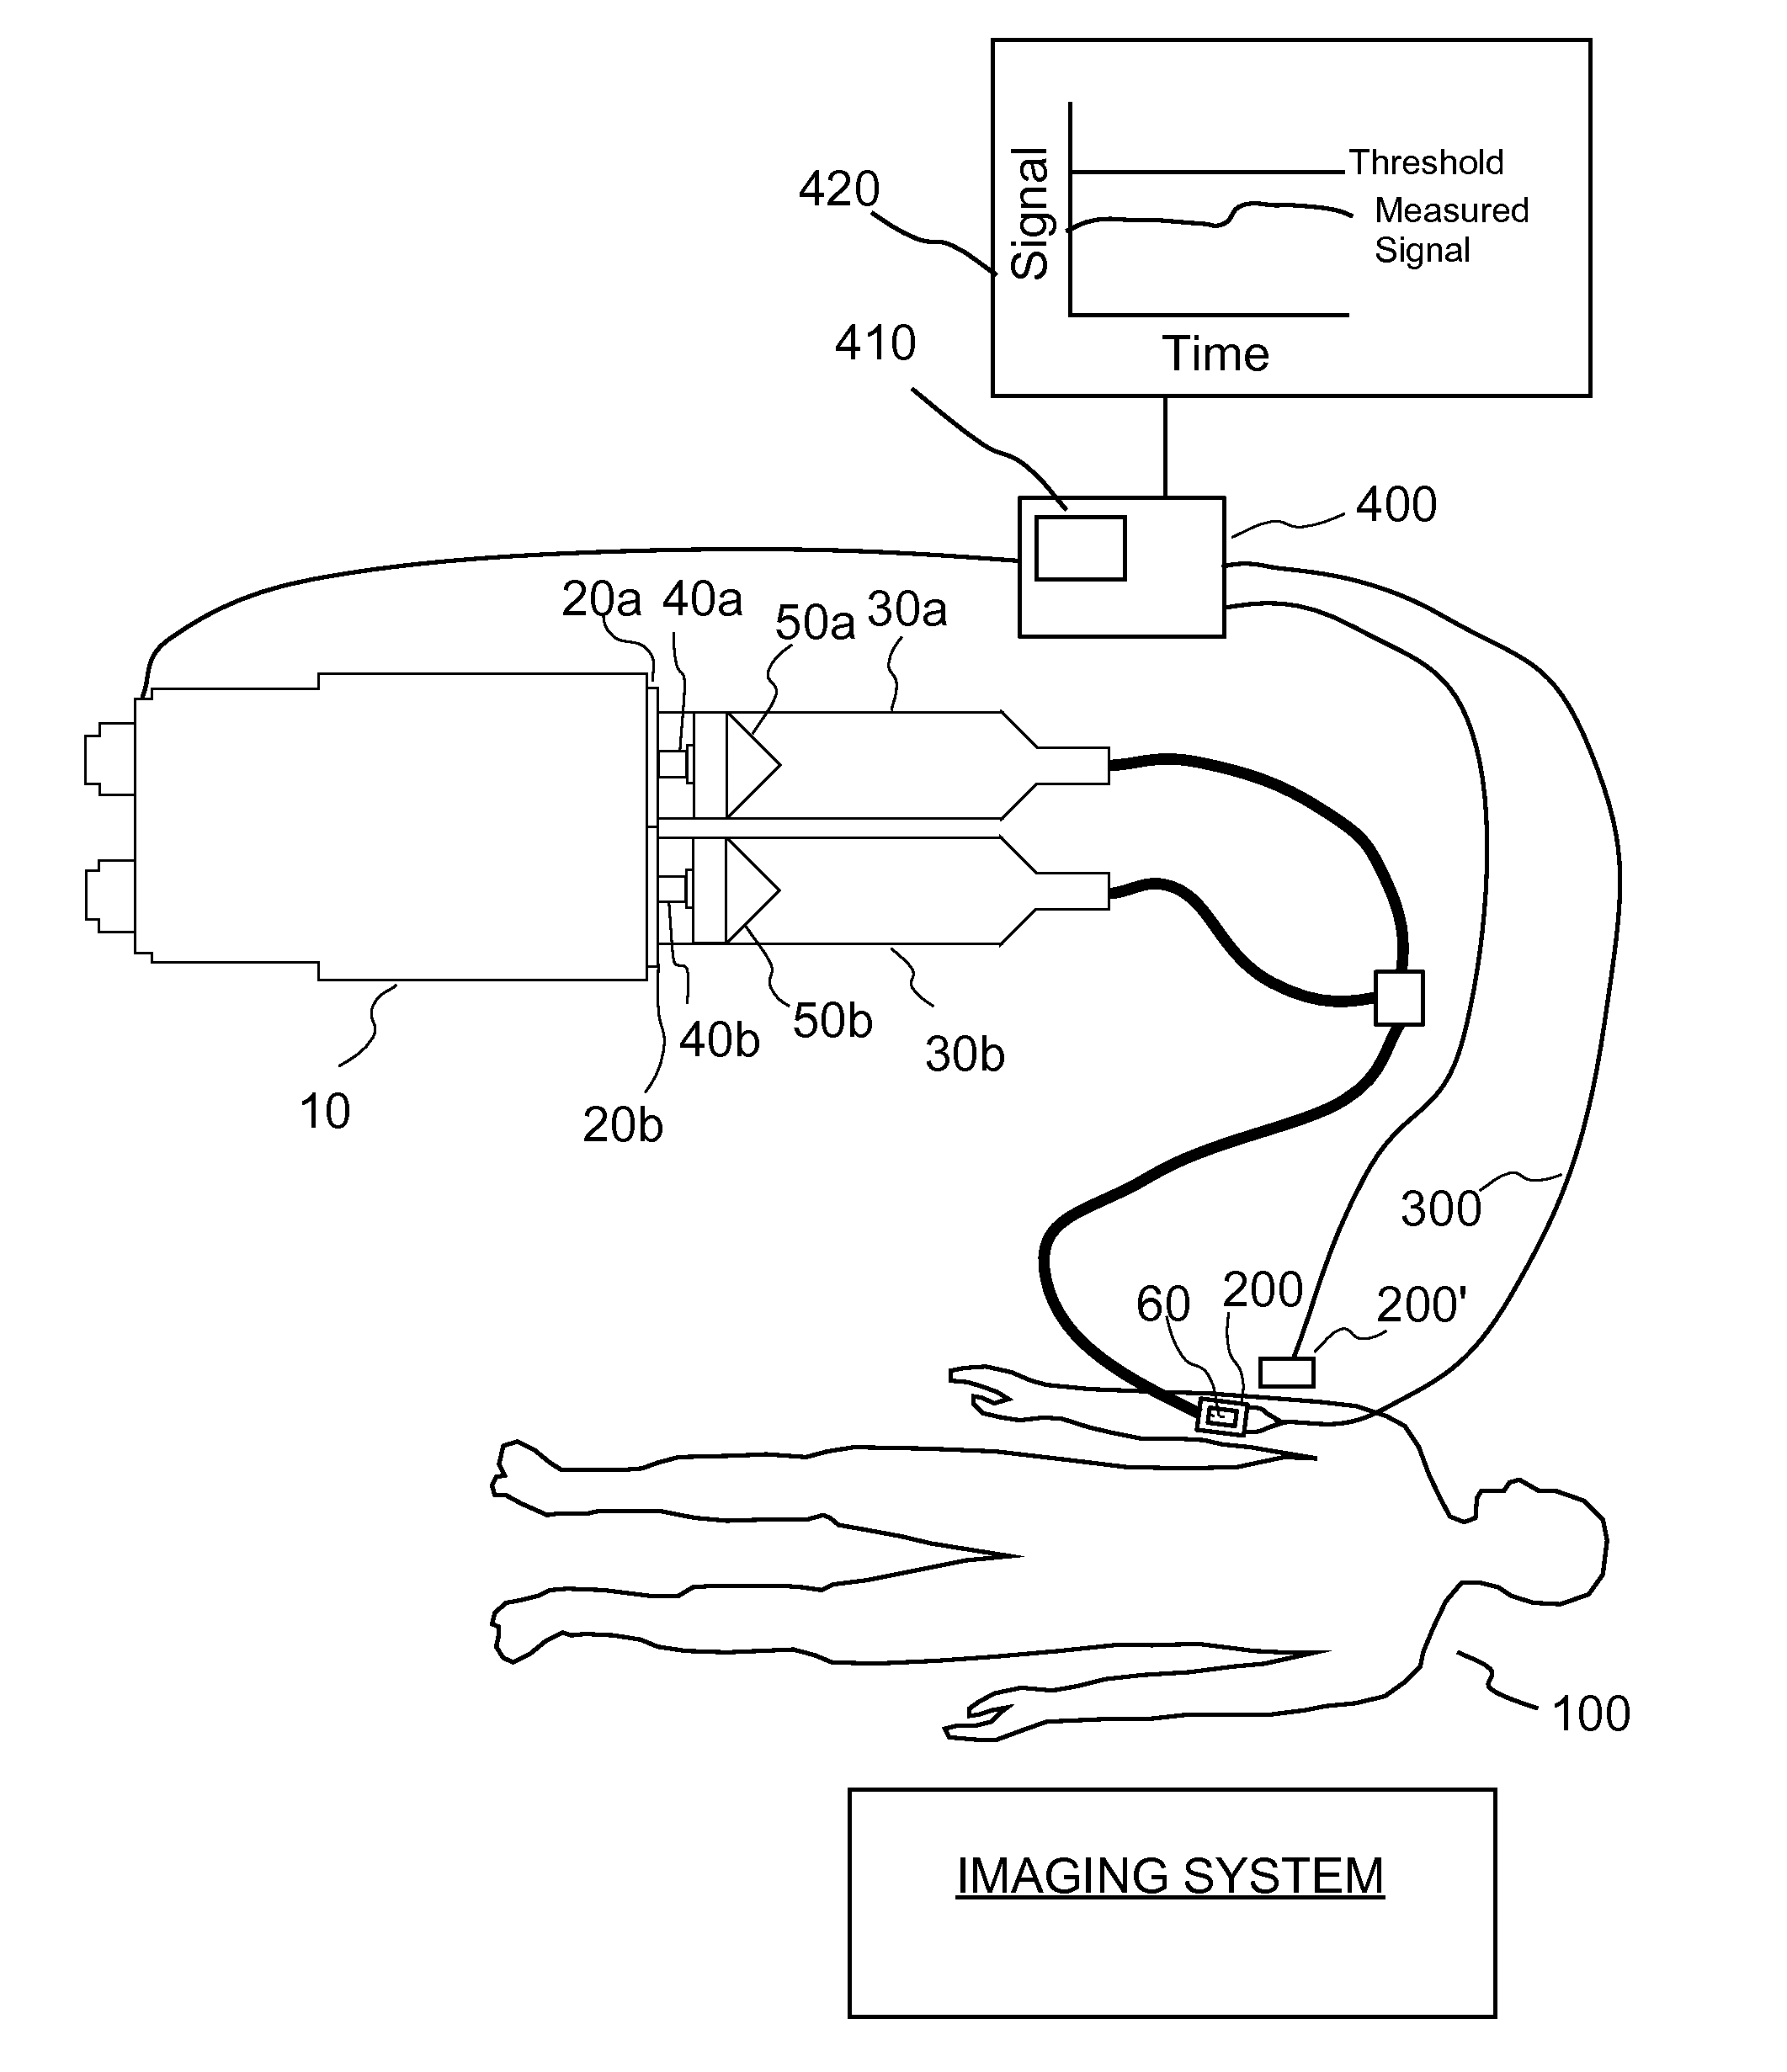 Devices, systems and methods for detecting increase fluid levels in tissue